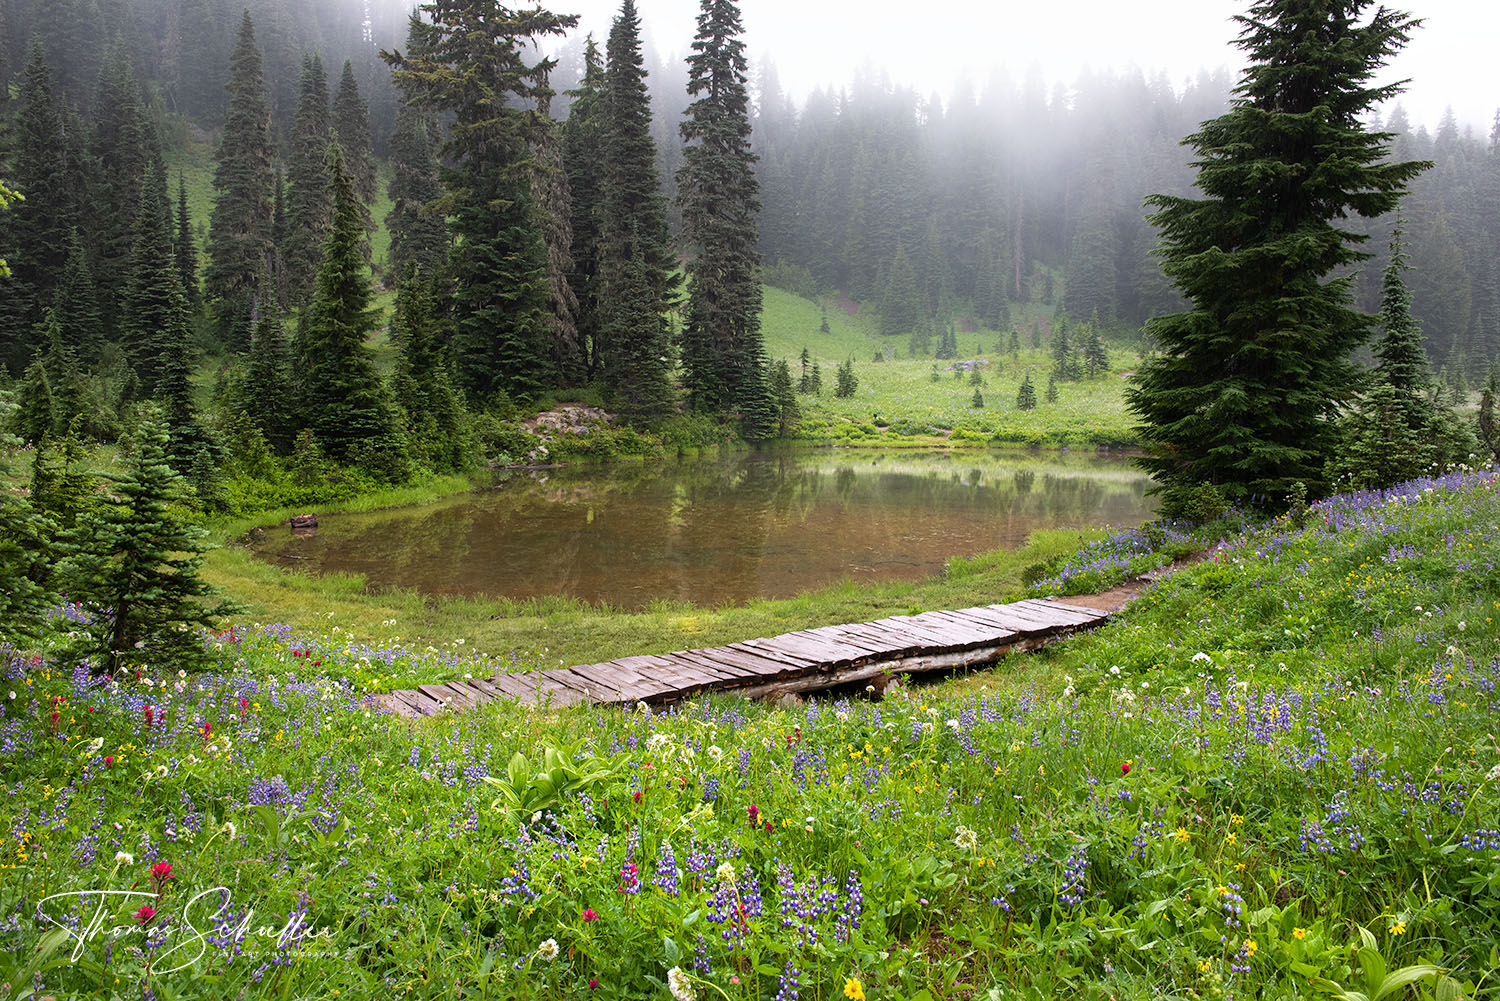 A tarn and wildflower meadow in Mt Rainier National Park near Chinook Pass on a misty morning | Limited Edition Fine Art prints for sale